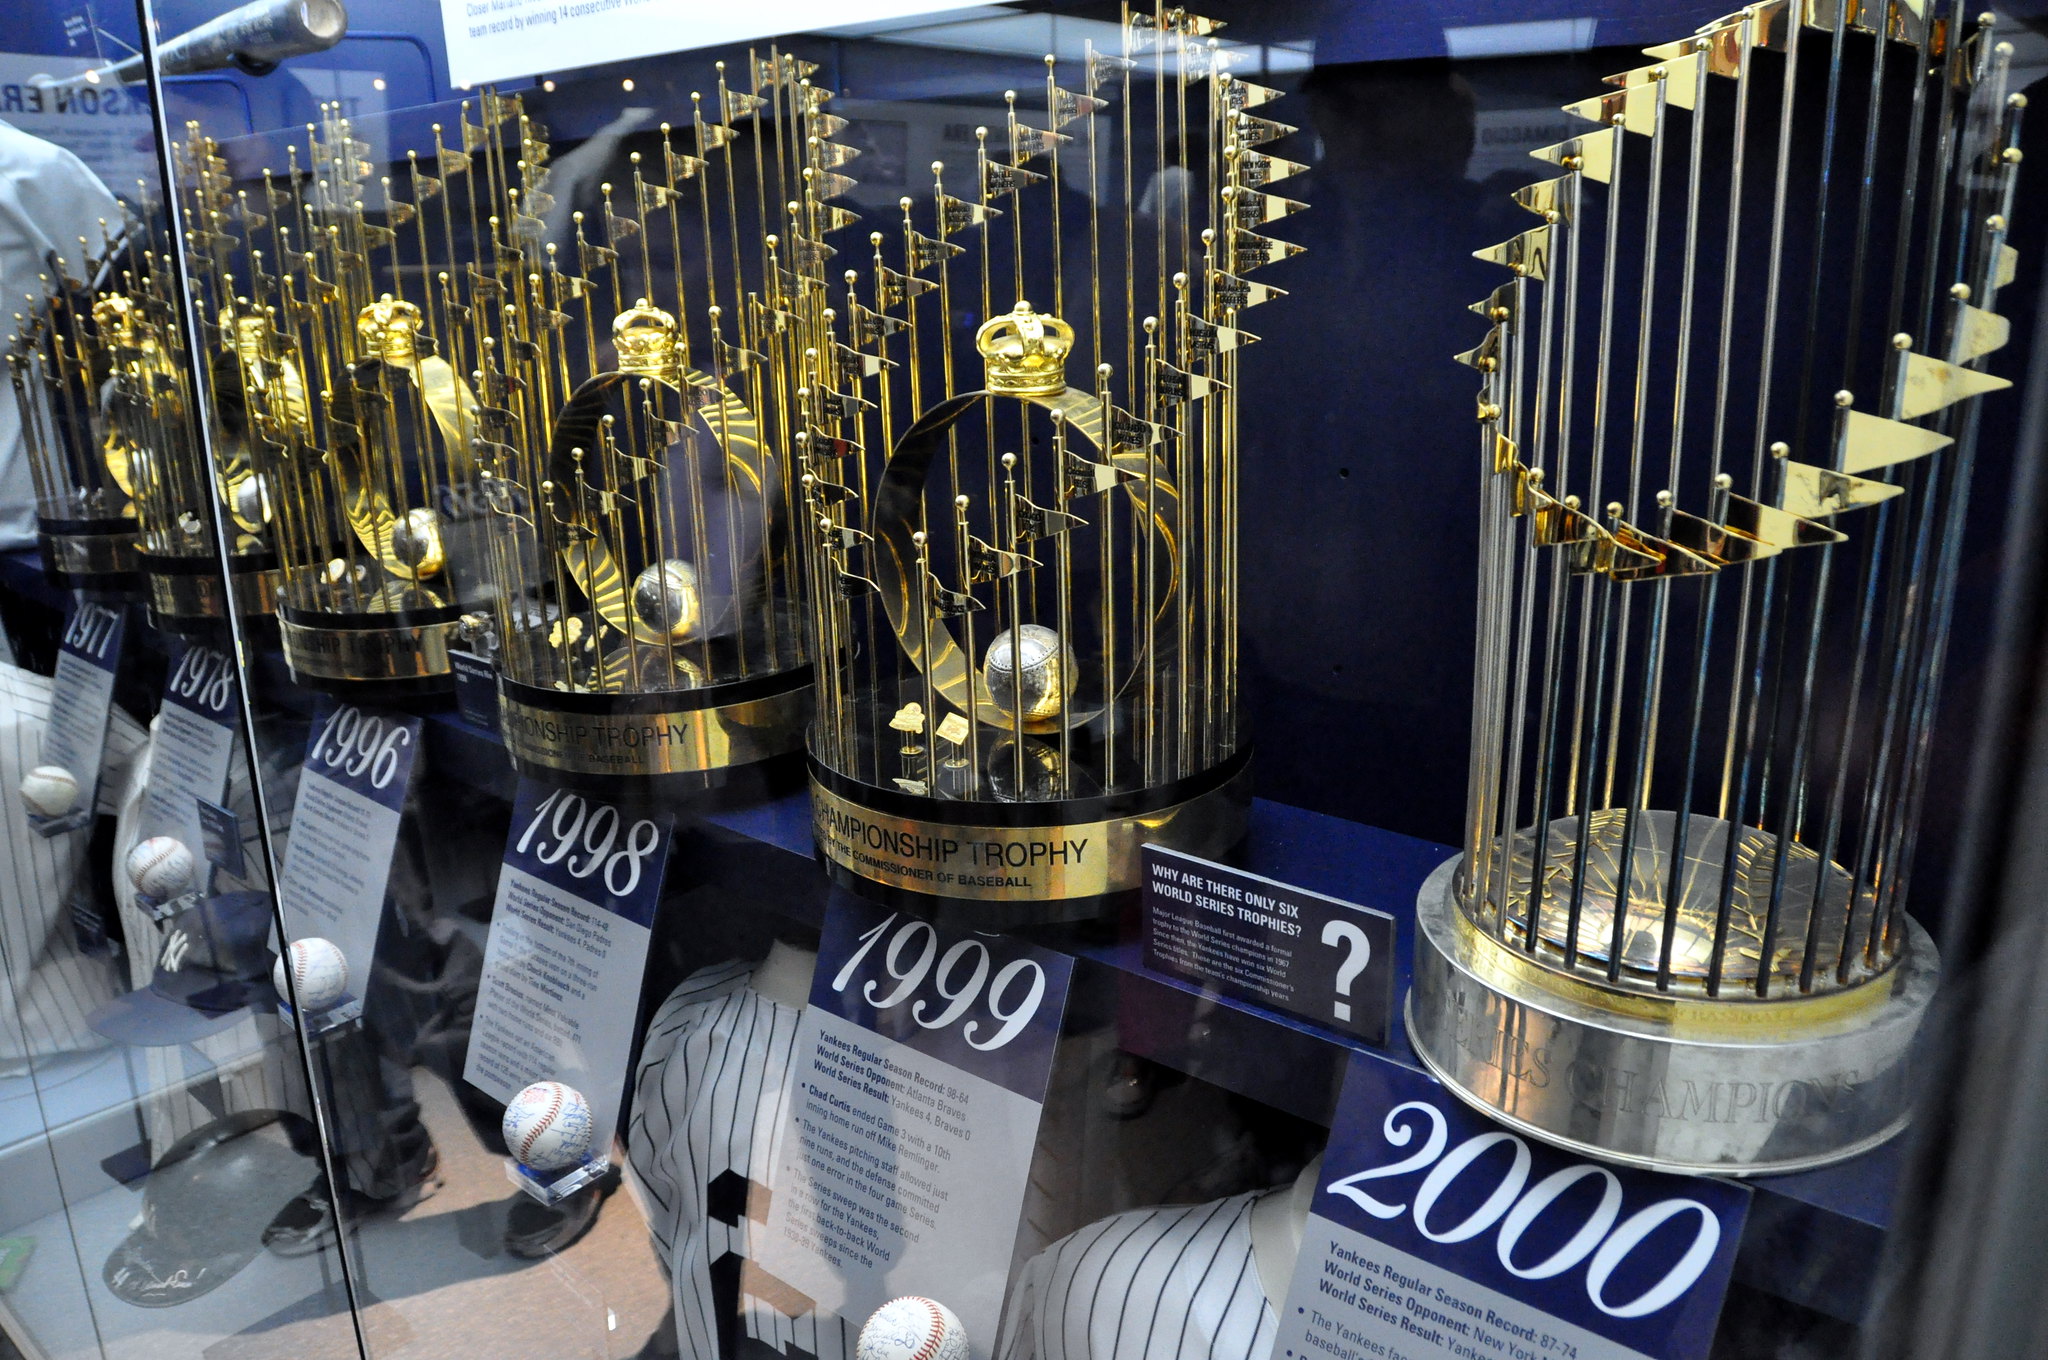 1998 New York Yankees World Series Champions Trophy Presented to